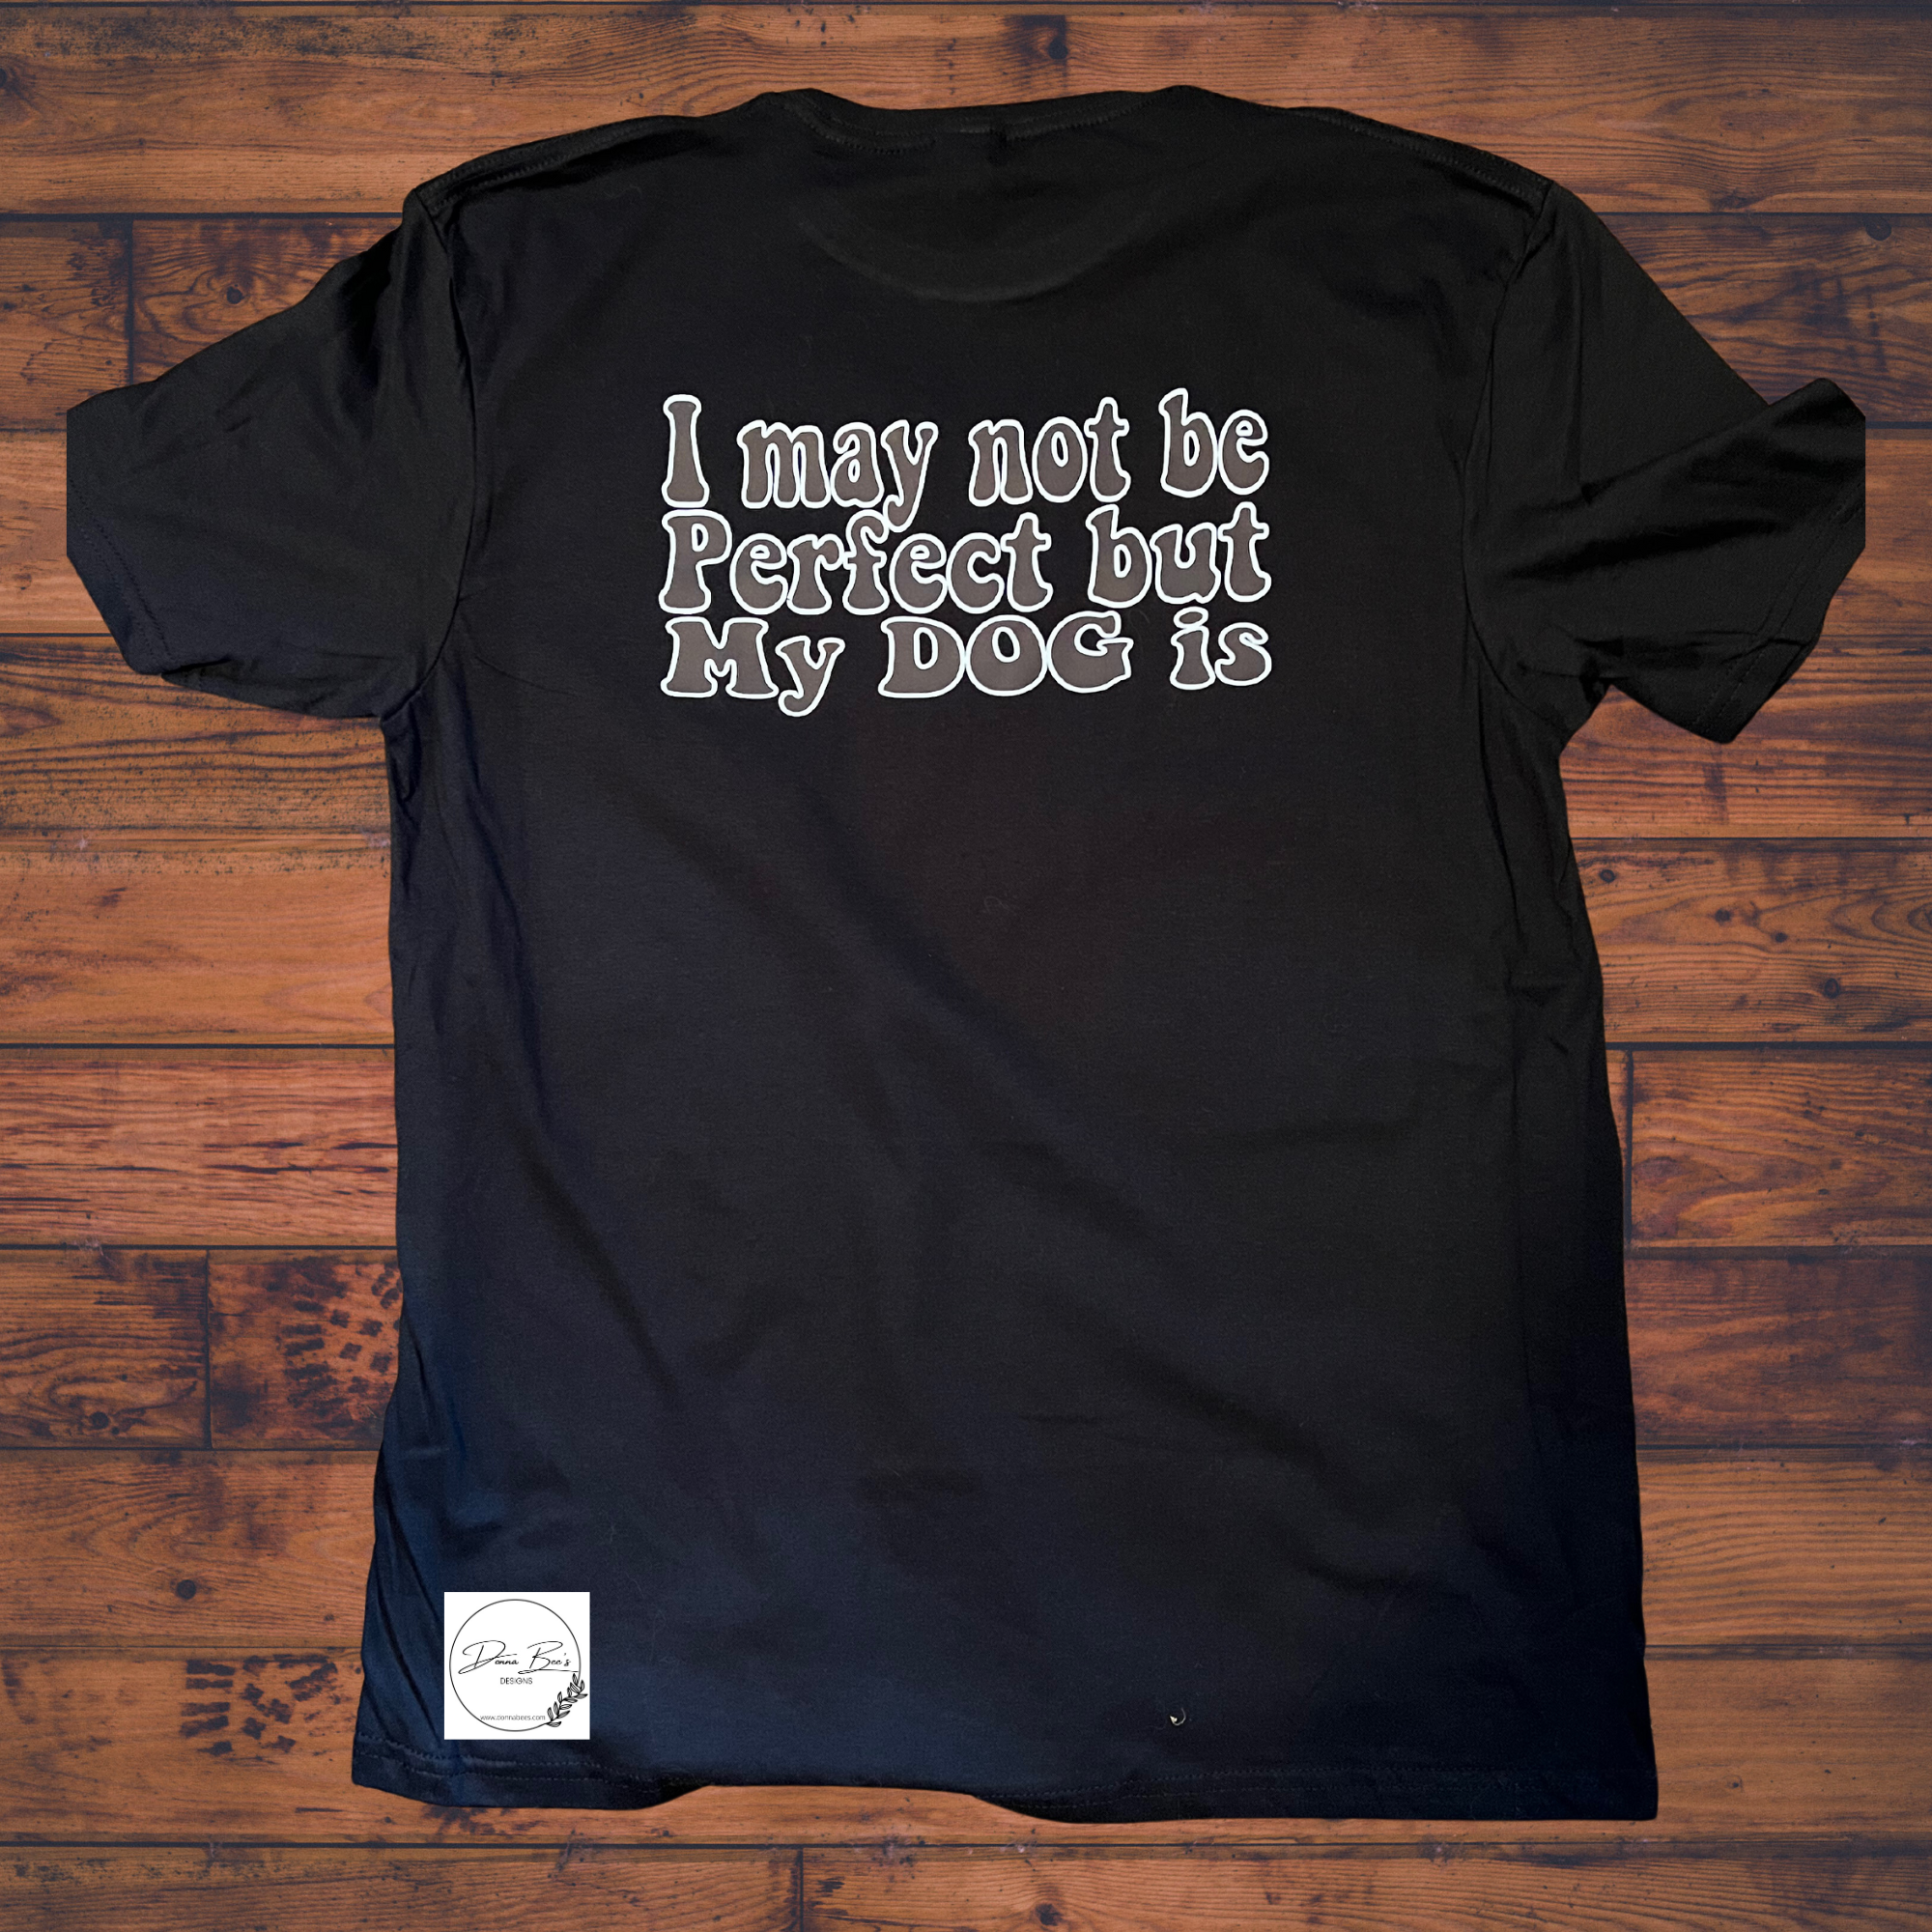 I may not be perfect but my dog is T-shirt | Dog lovers tee